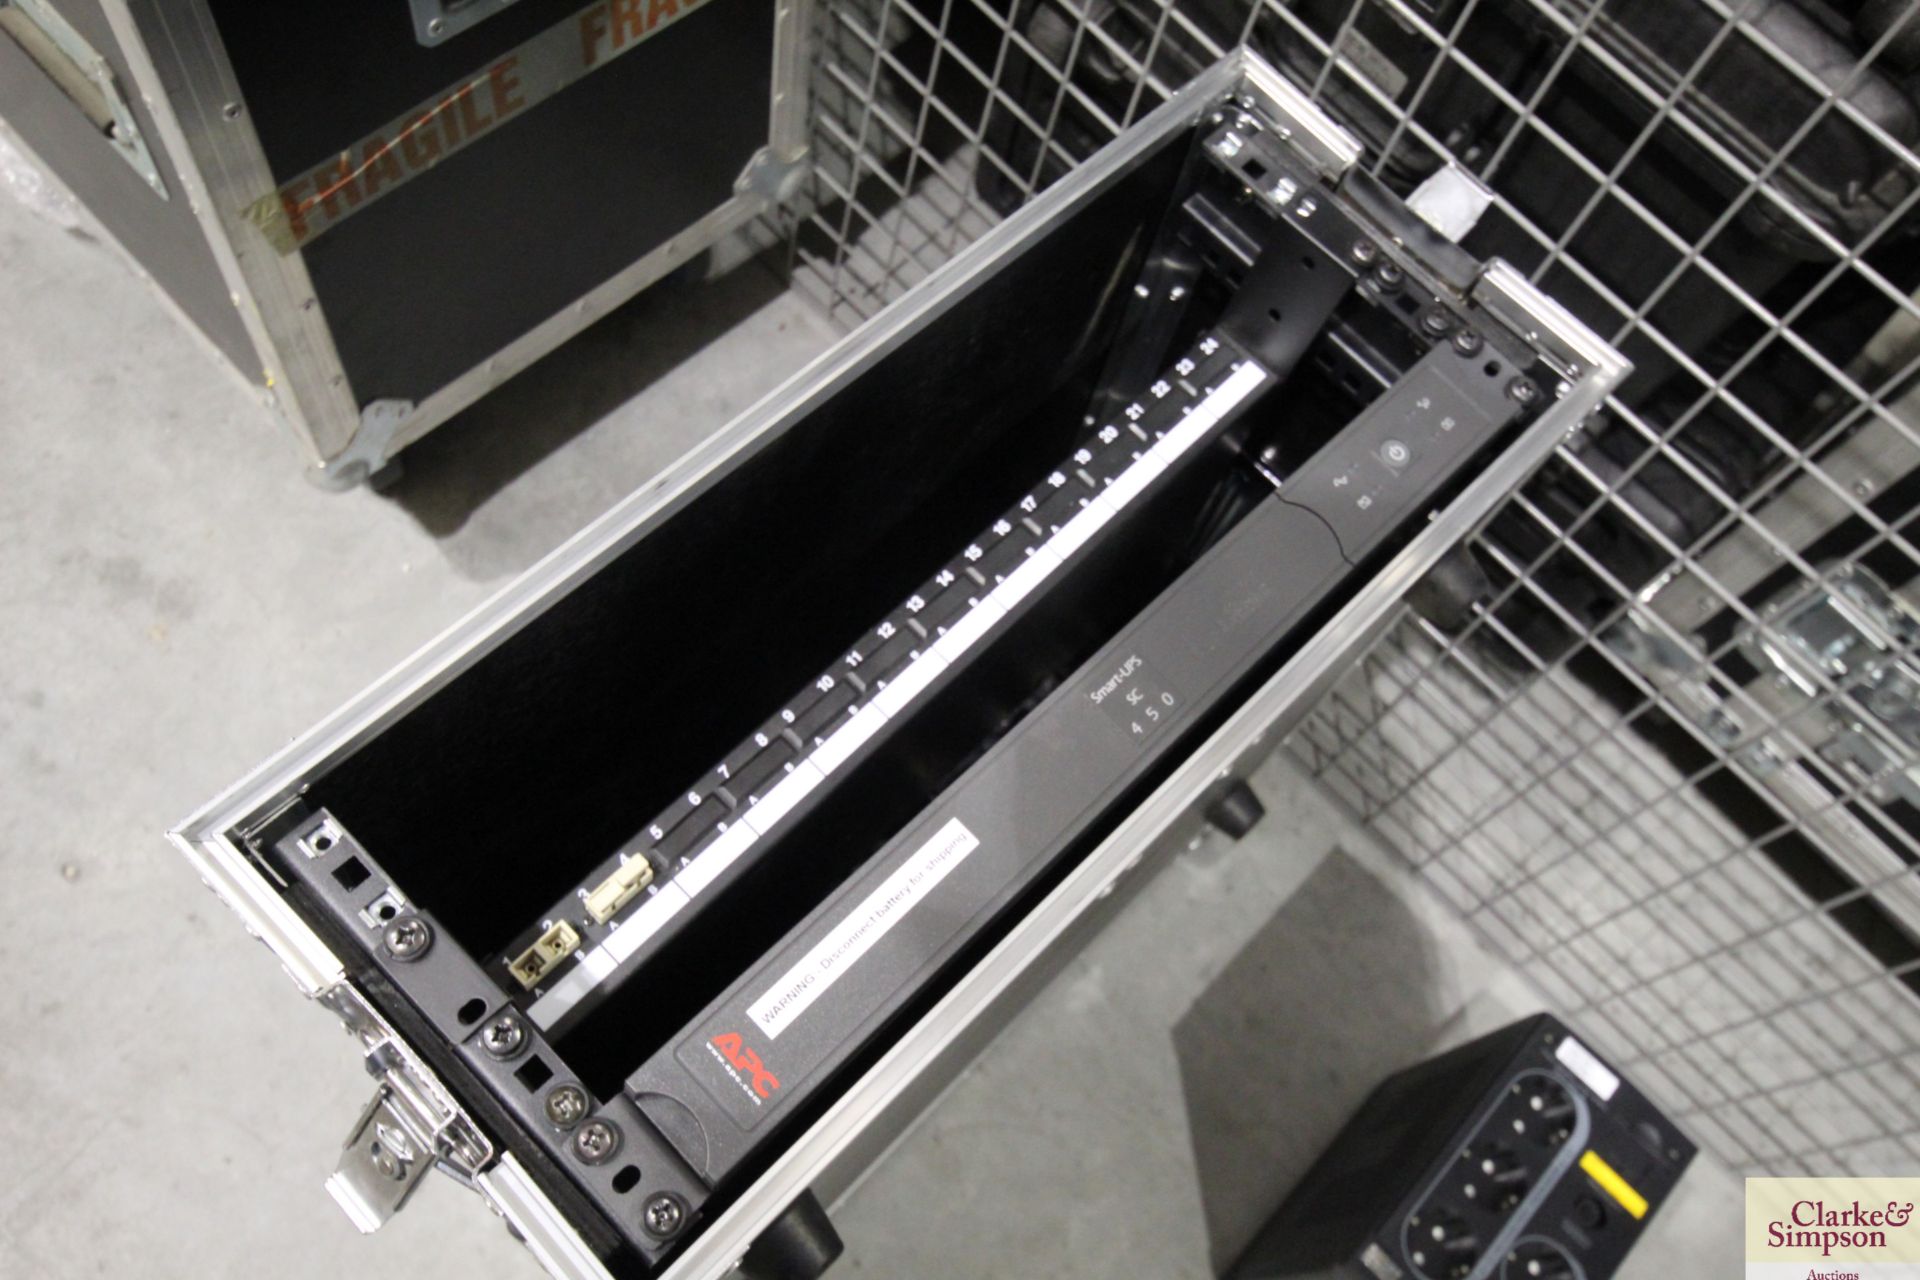 Spider flight case containing network switch and a APC power supply. V - Image 3 of 3